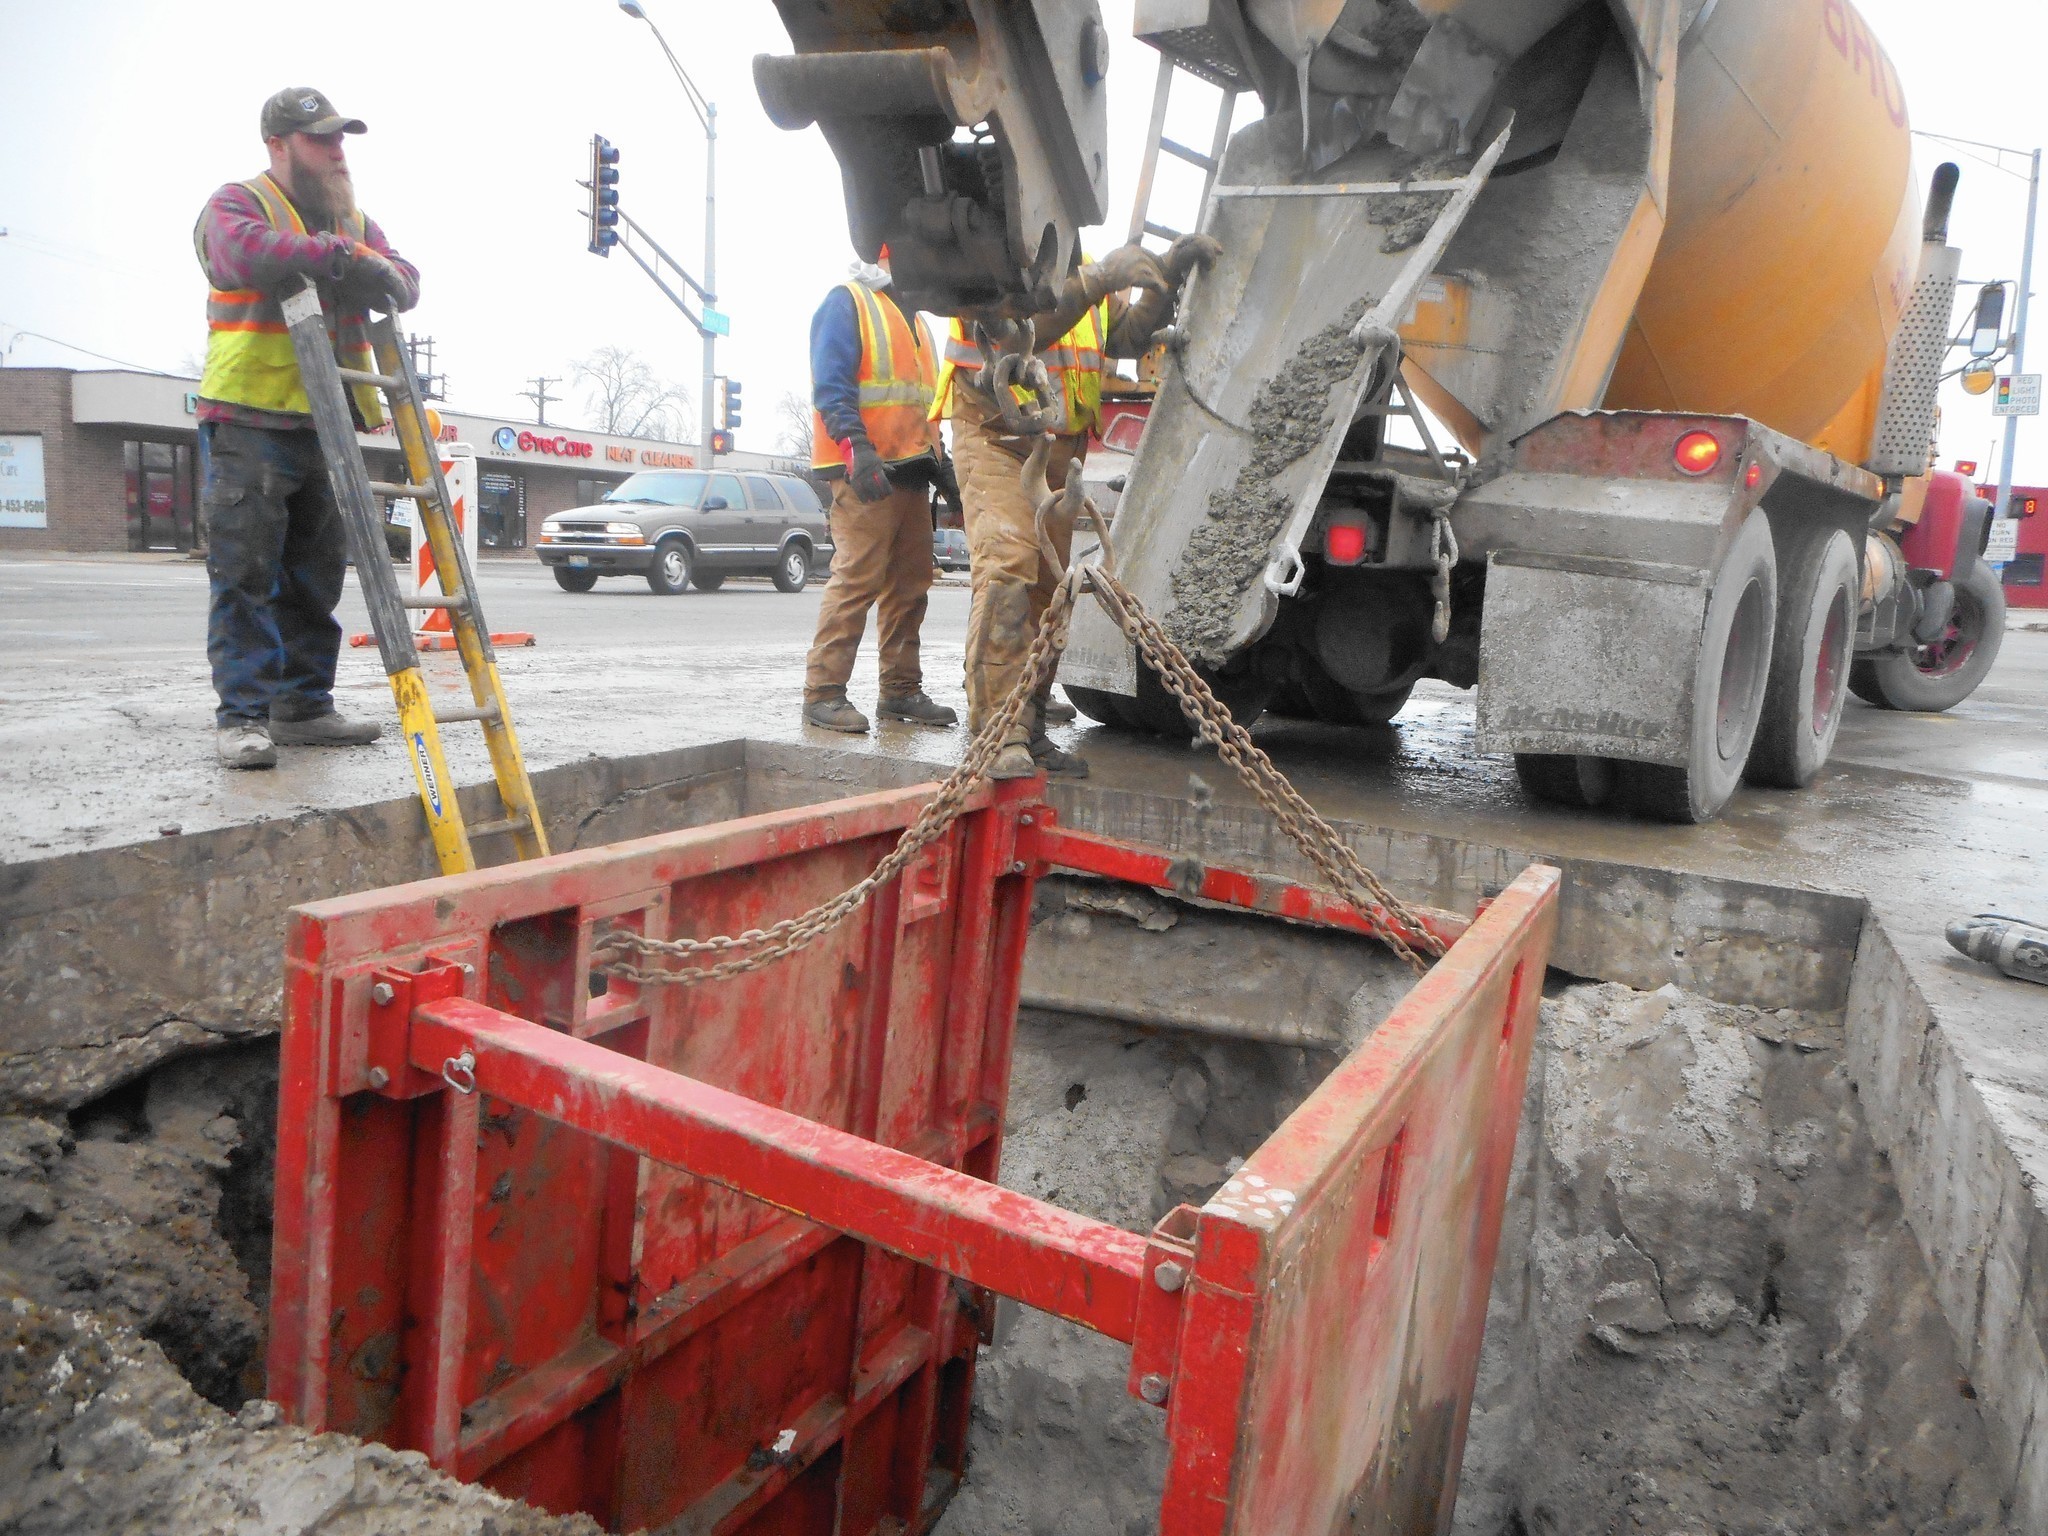 Collapsed sewer closes traffic lanes at Grand and Thatcher - Chicago Tribune